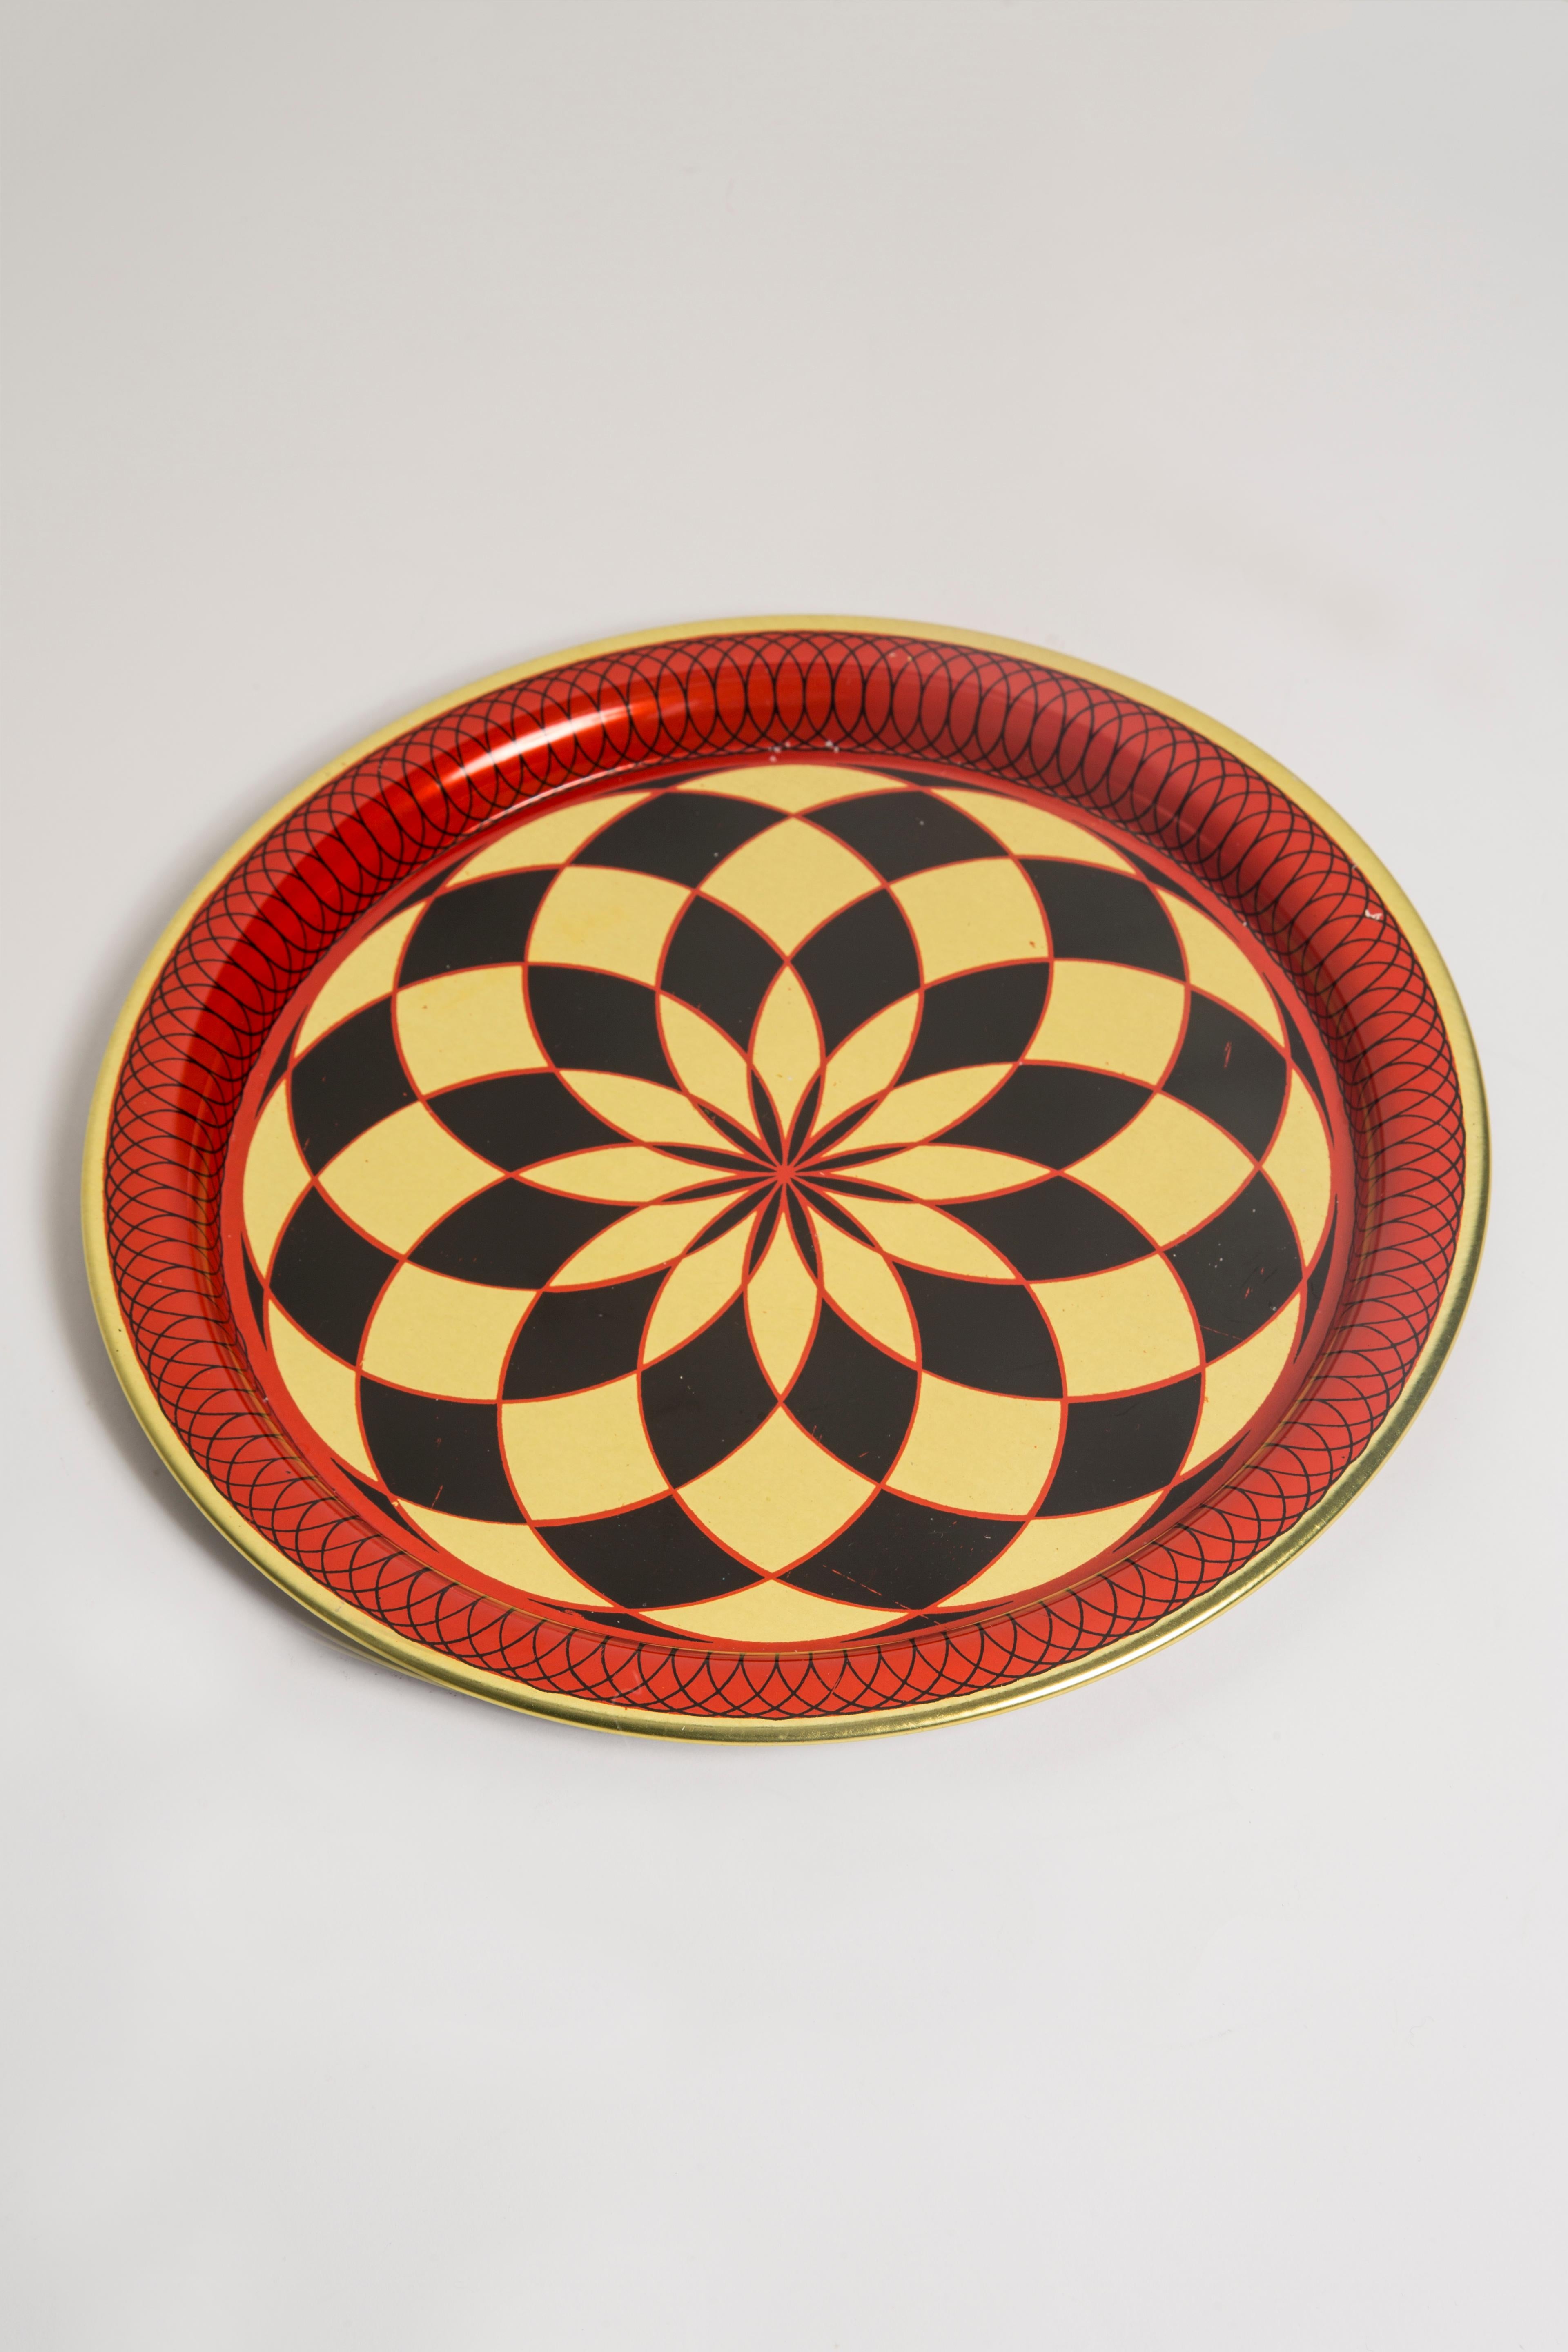 Midcentury Vintage Red Black and Gold Decorative Metal Plate, Poland, 1960s For Sale 2